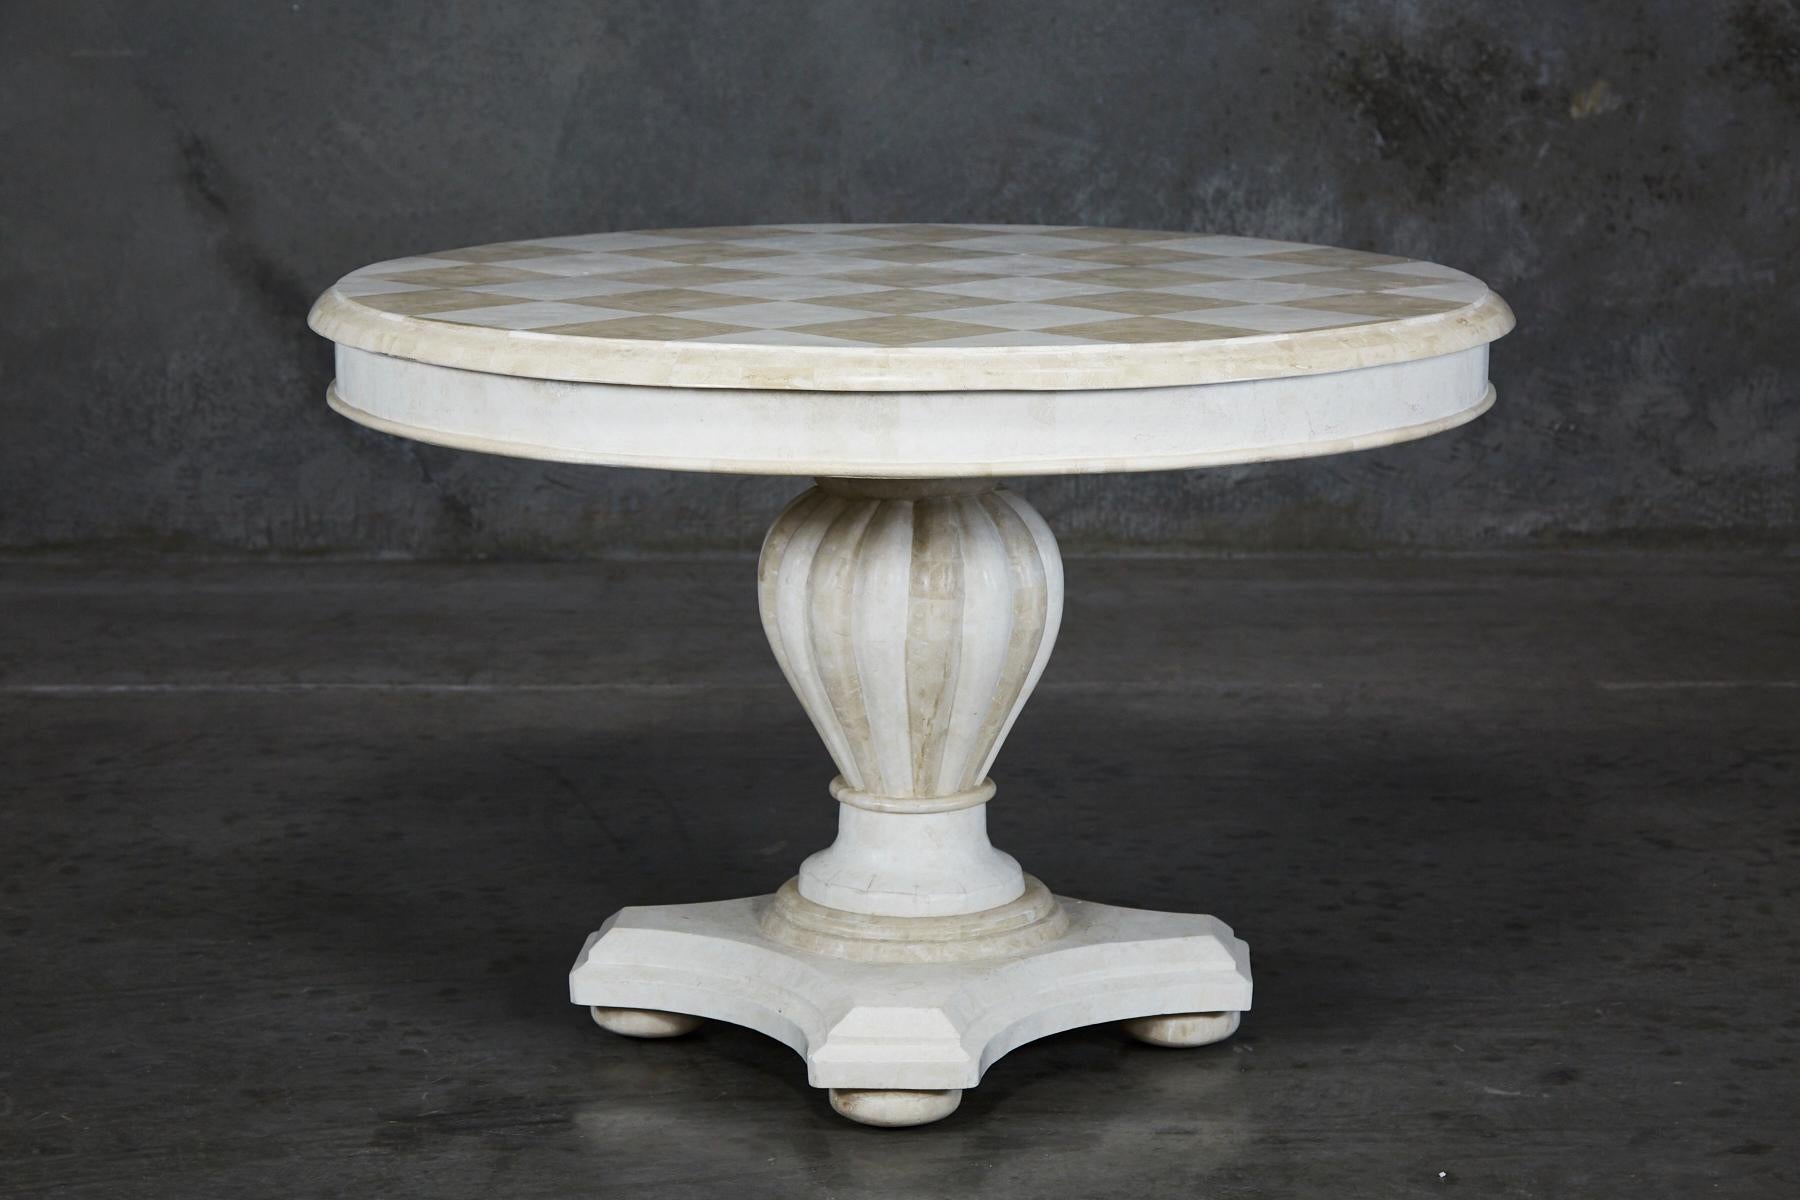 Round dining table fully hand-inlaid with white stone and beige fossil stone. Pedestal base with classical fluted styling, set upon bun feet. Tabletop with Checkered pattern.

All furnishings are made from 100% natural Fossil Stone or Seashell